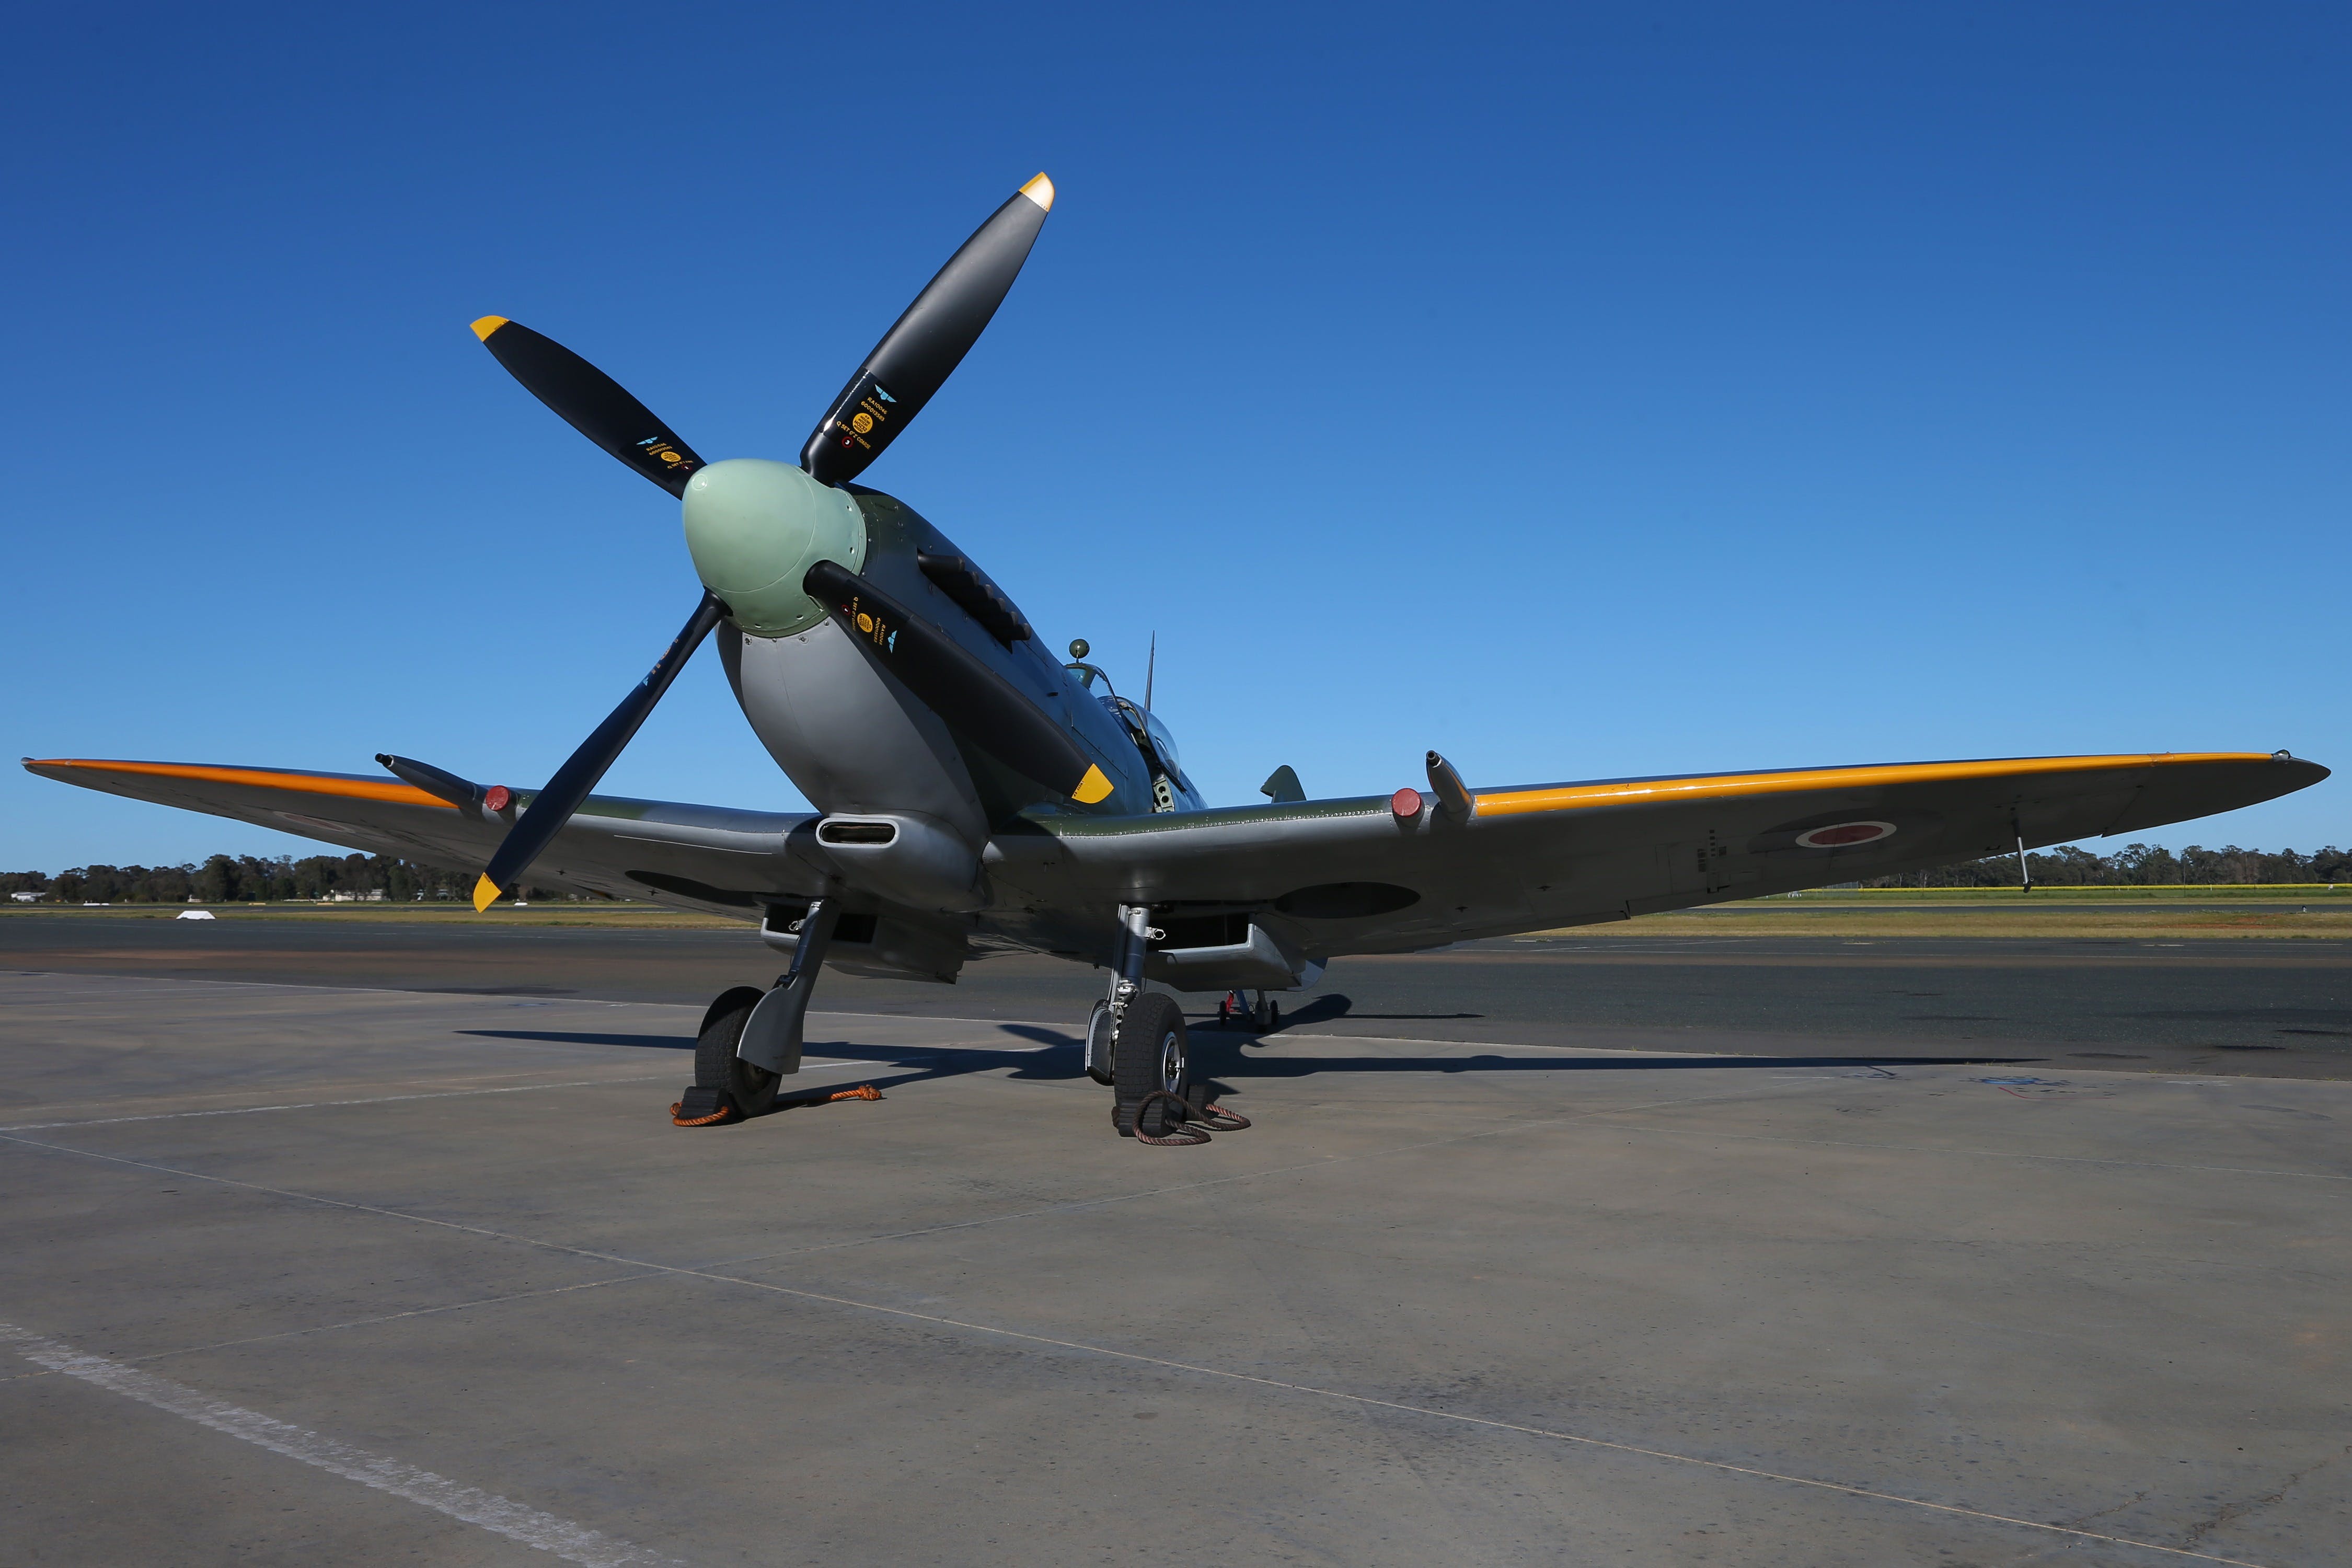 October Weekend Aircraft Showcase - eAccommodation